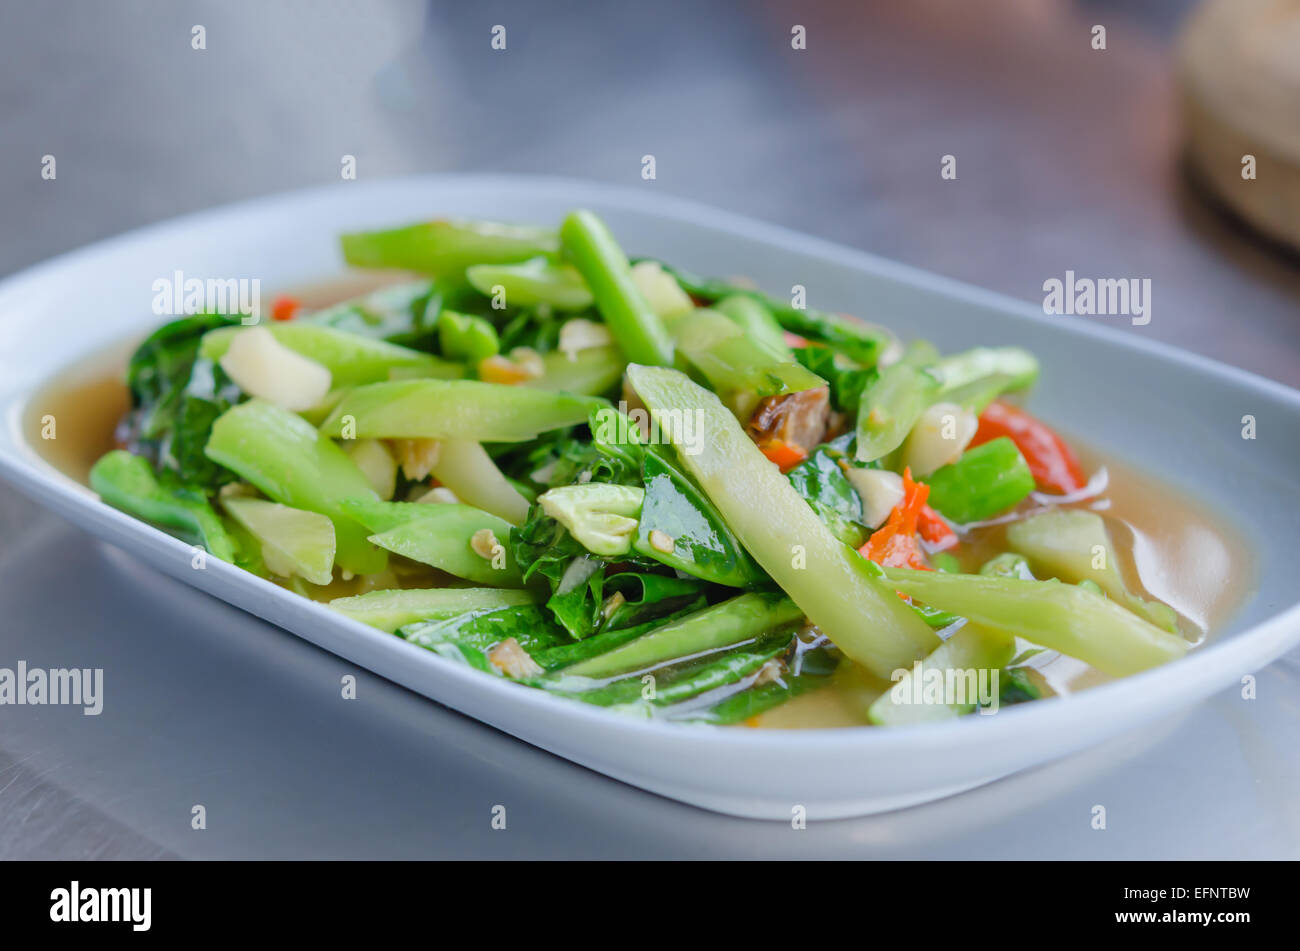 Stir fried kaled with sun dried salted fish Stock Photo